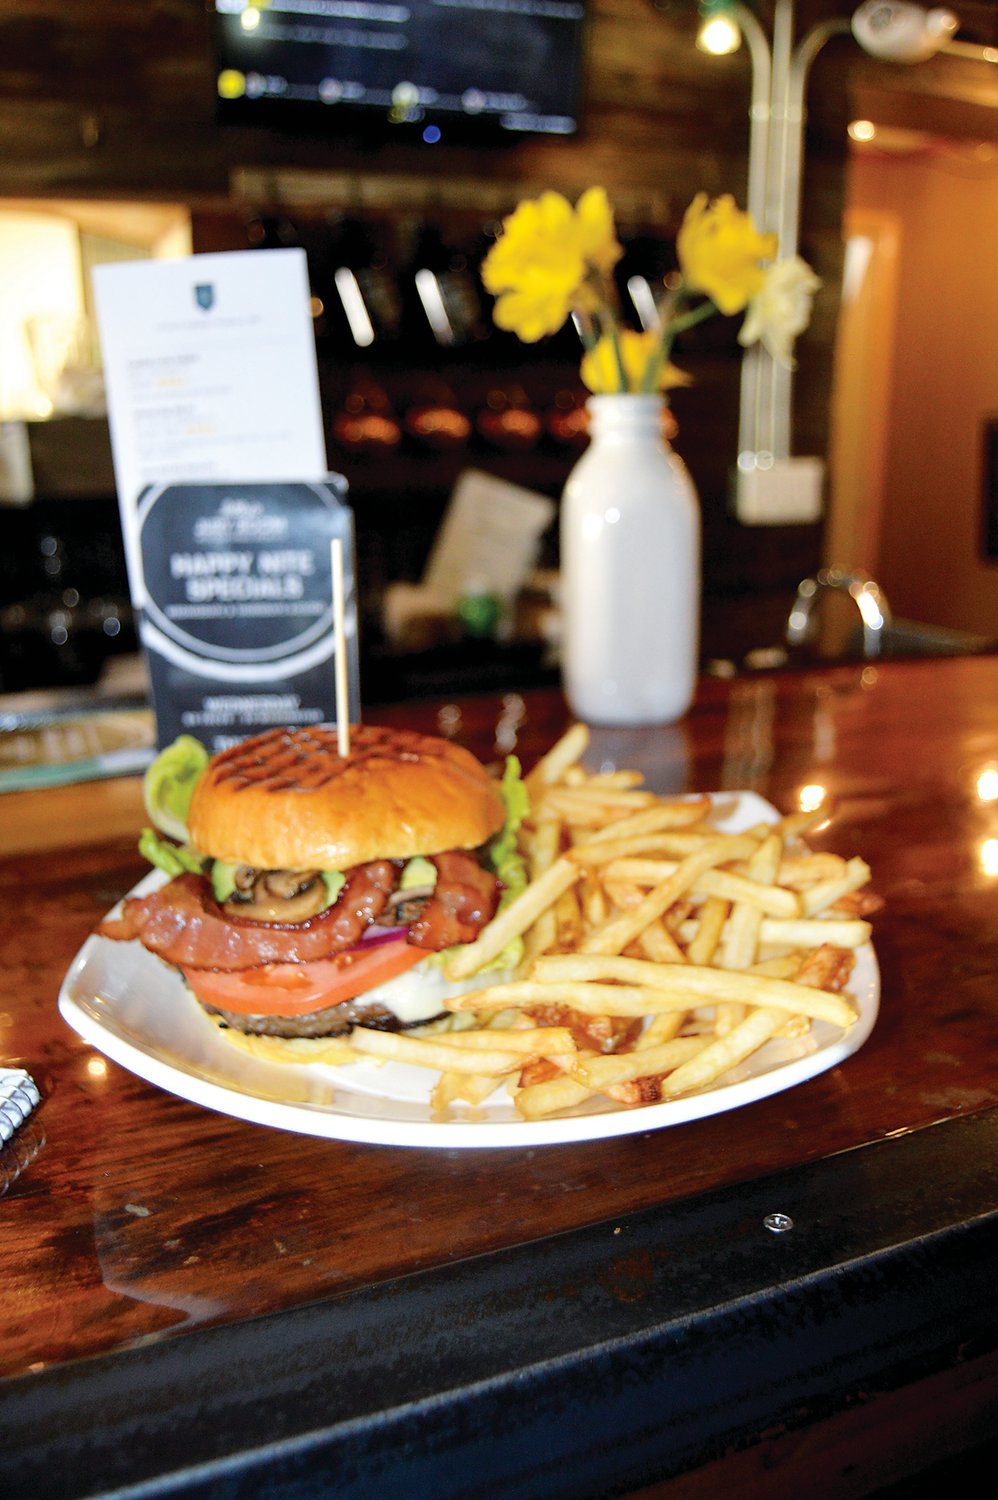 Burgers are among the top sellers at the Jury Room, a small restaurant and boutique brewery in the heart of Doylestown. Photograph by Susan S. Yeske.